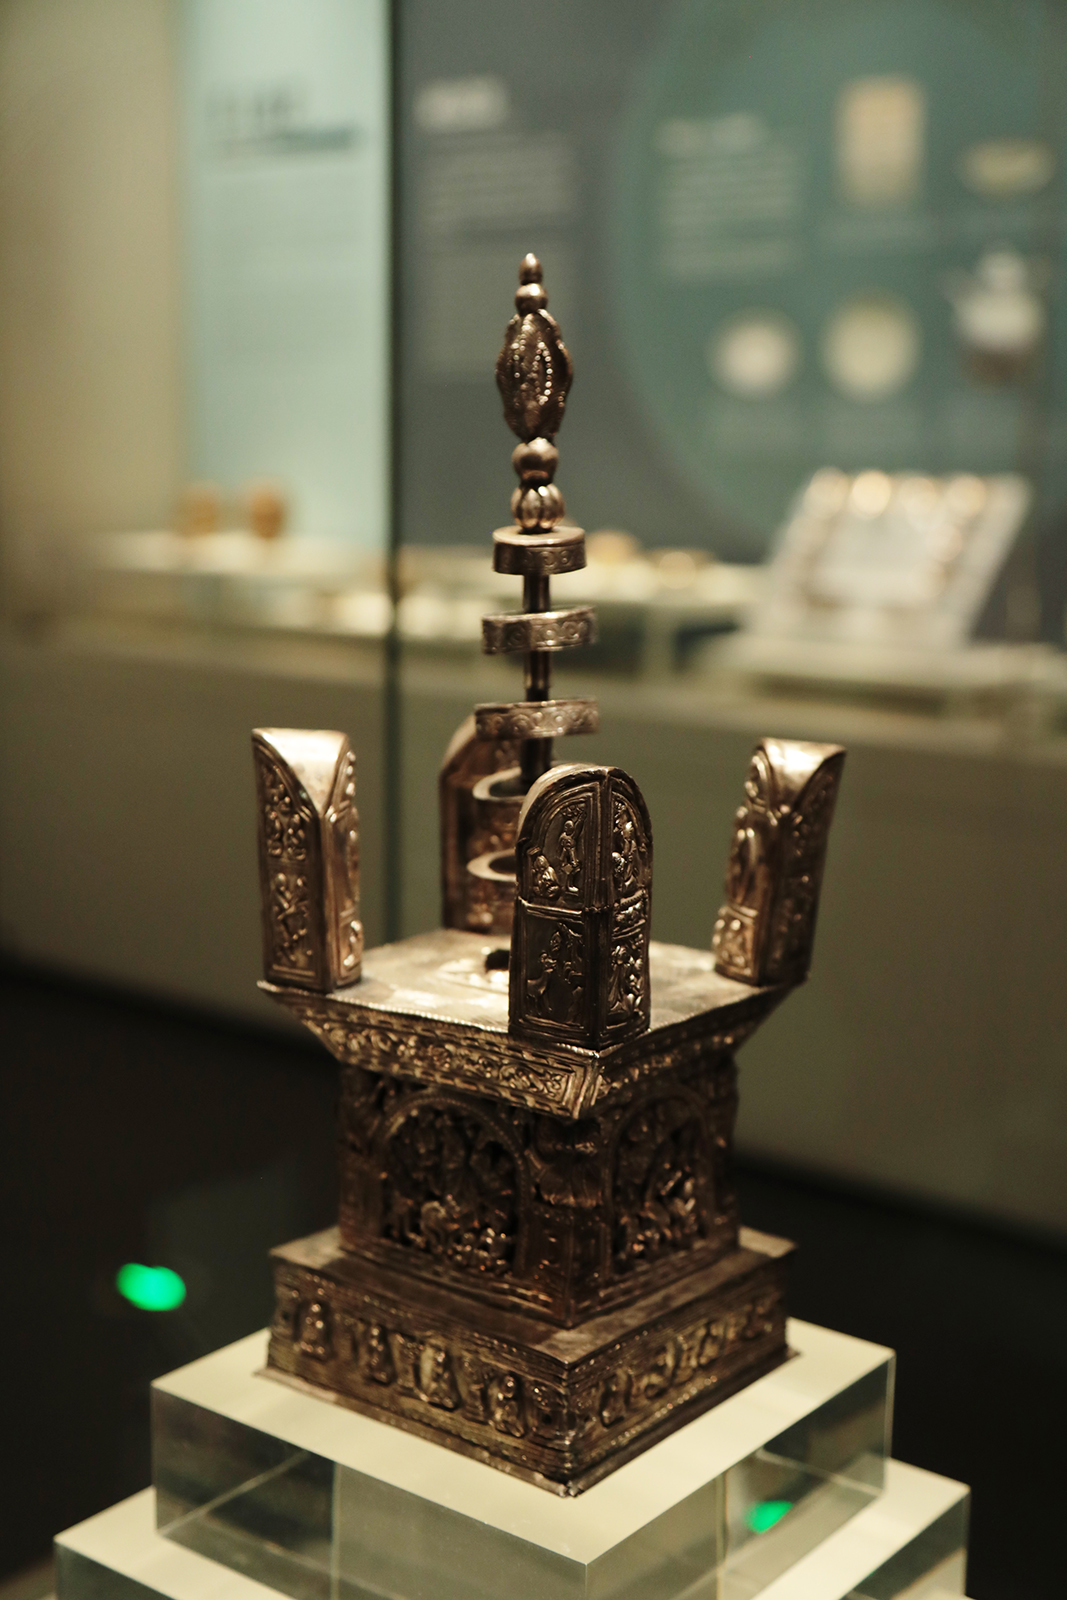 A gold-plated silver Ashoka pagoda dating back to the Five Dynasties and Ten Kingdoms period (907-979) is on display in the Zhijiang Branch of the Zhejiang Provincial Museum in Hangzhou, Zhejiang Province. /CGTN